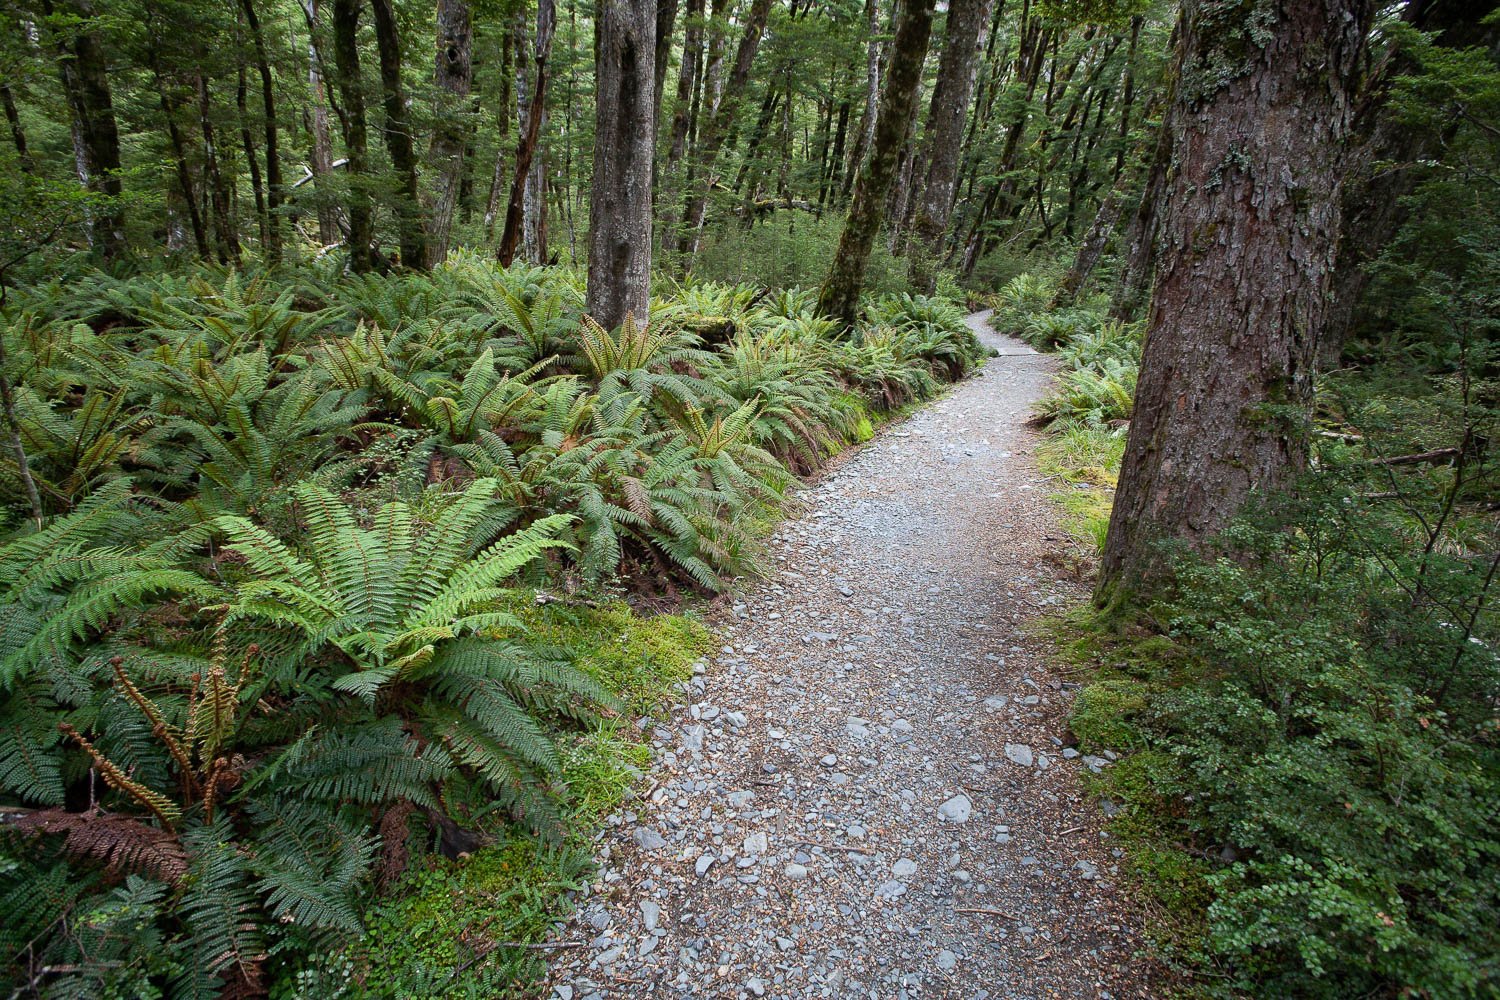 A pathway between the thick plants and trees, The Routeburn Track #2 - New Zealand